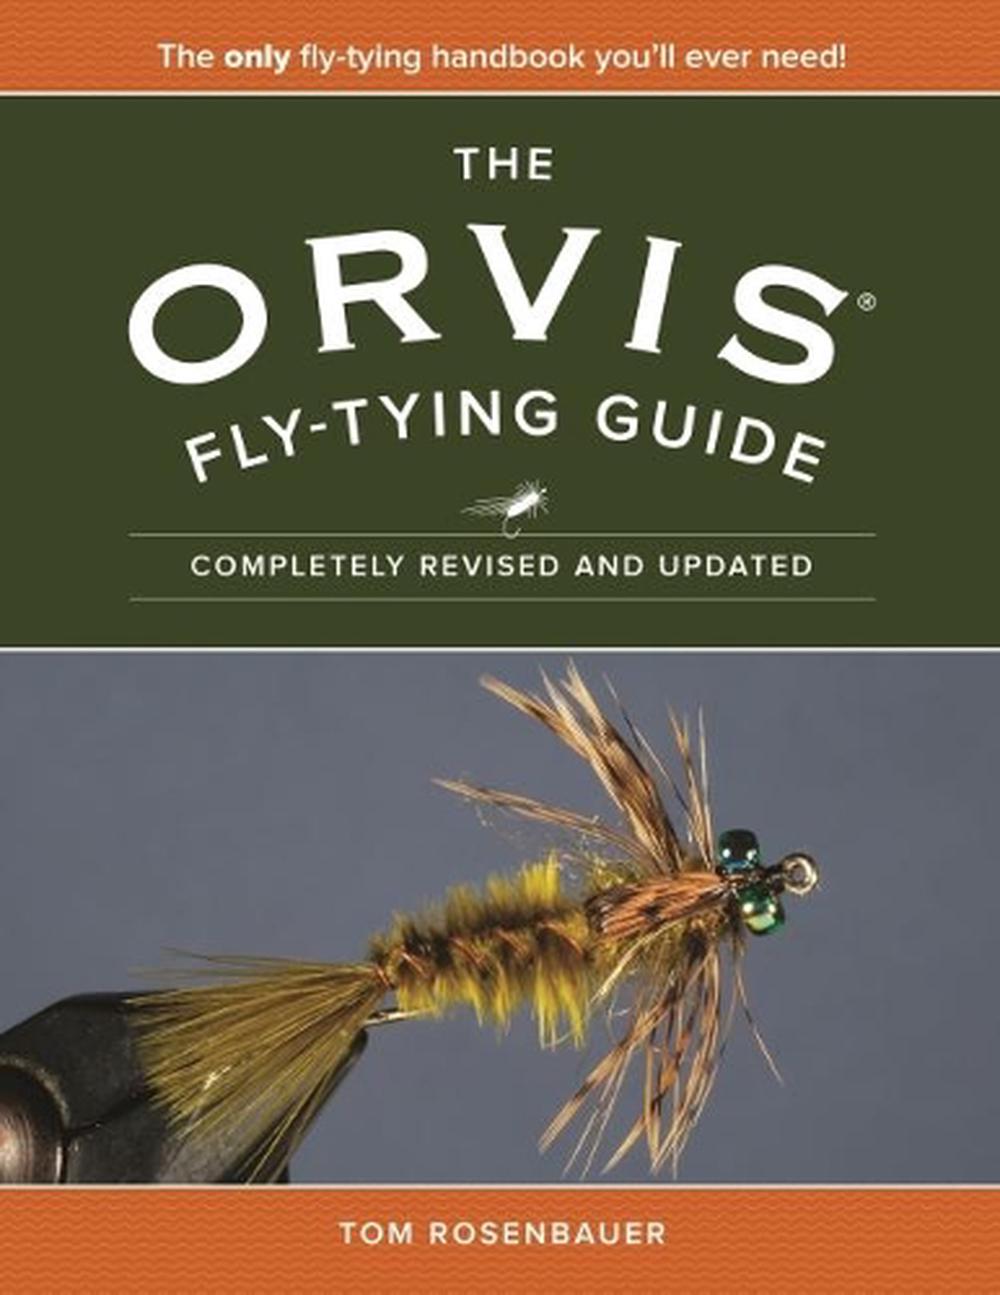 The Orvis Fly-Tying Guide by Tom Rosenbauer, Paperback, 9781493025817